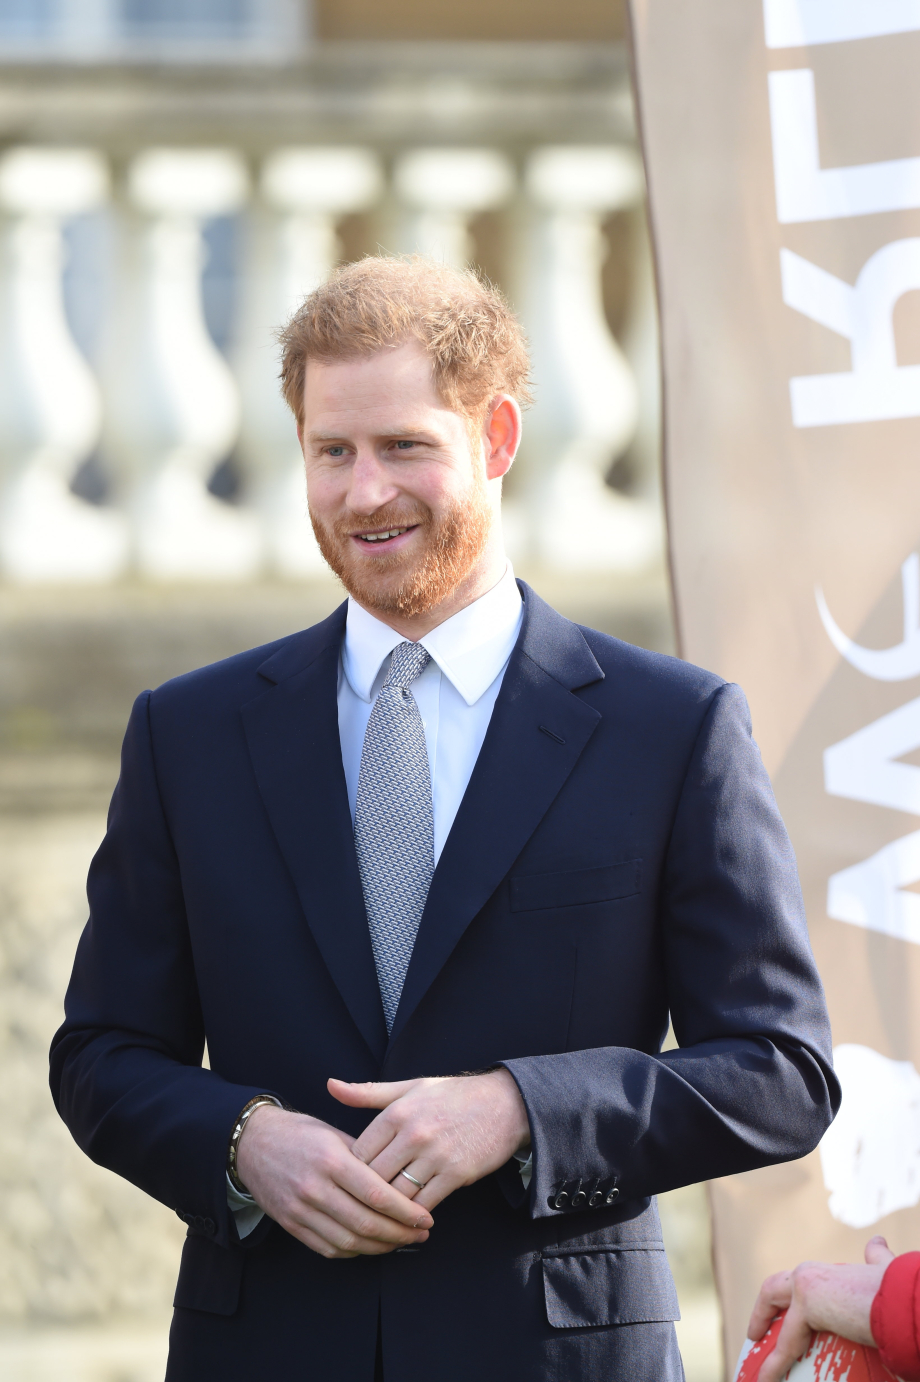 The Duke of Sussex hosts The Rugby League World Cup Draw live from Buckingham Palace The Royal Family